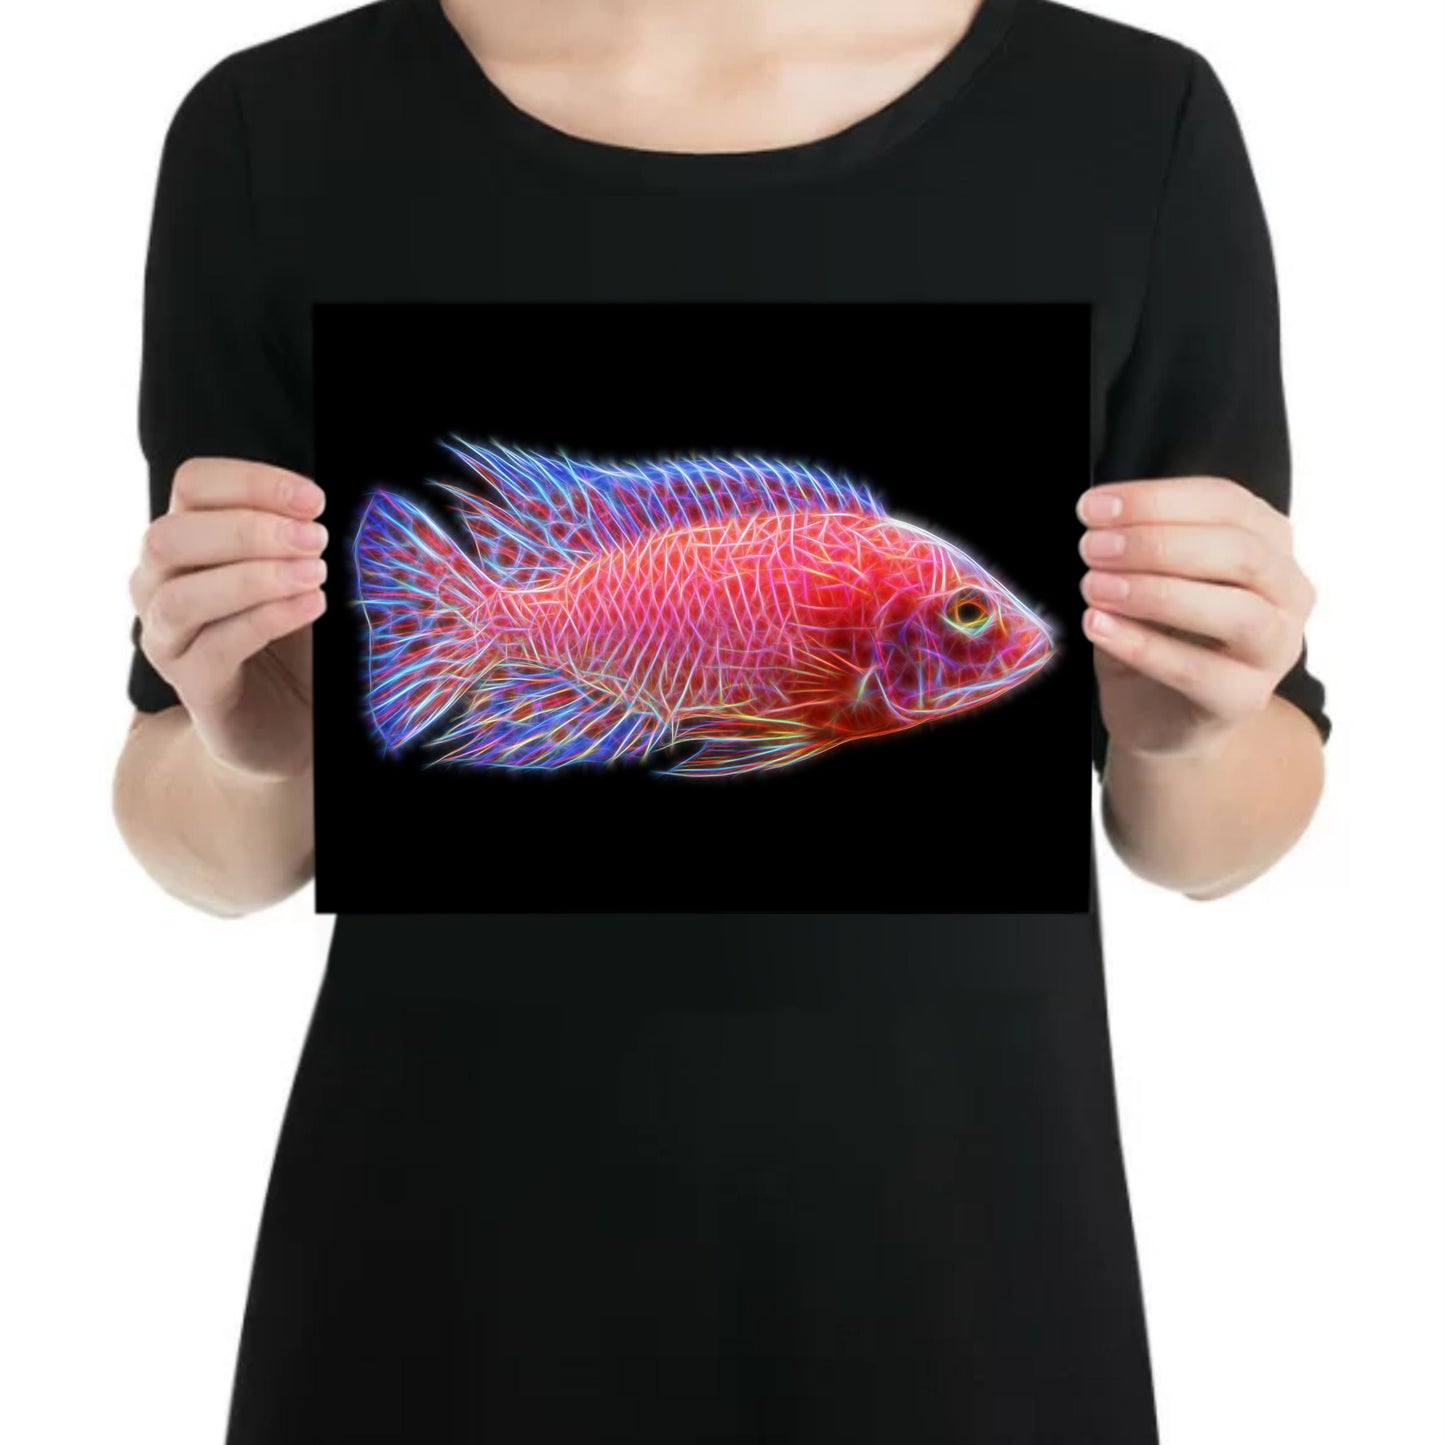 Dragon Blood Peacock Cichlid Metal Wall Plaque with Stunning Fractal Art Design. Aulonocara Sp